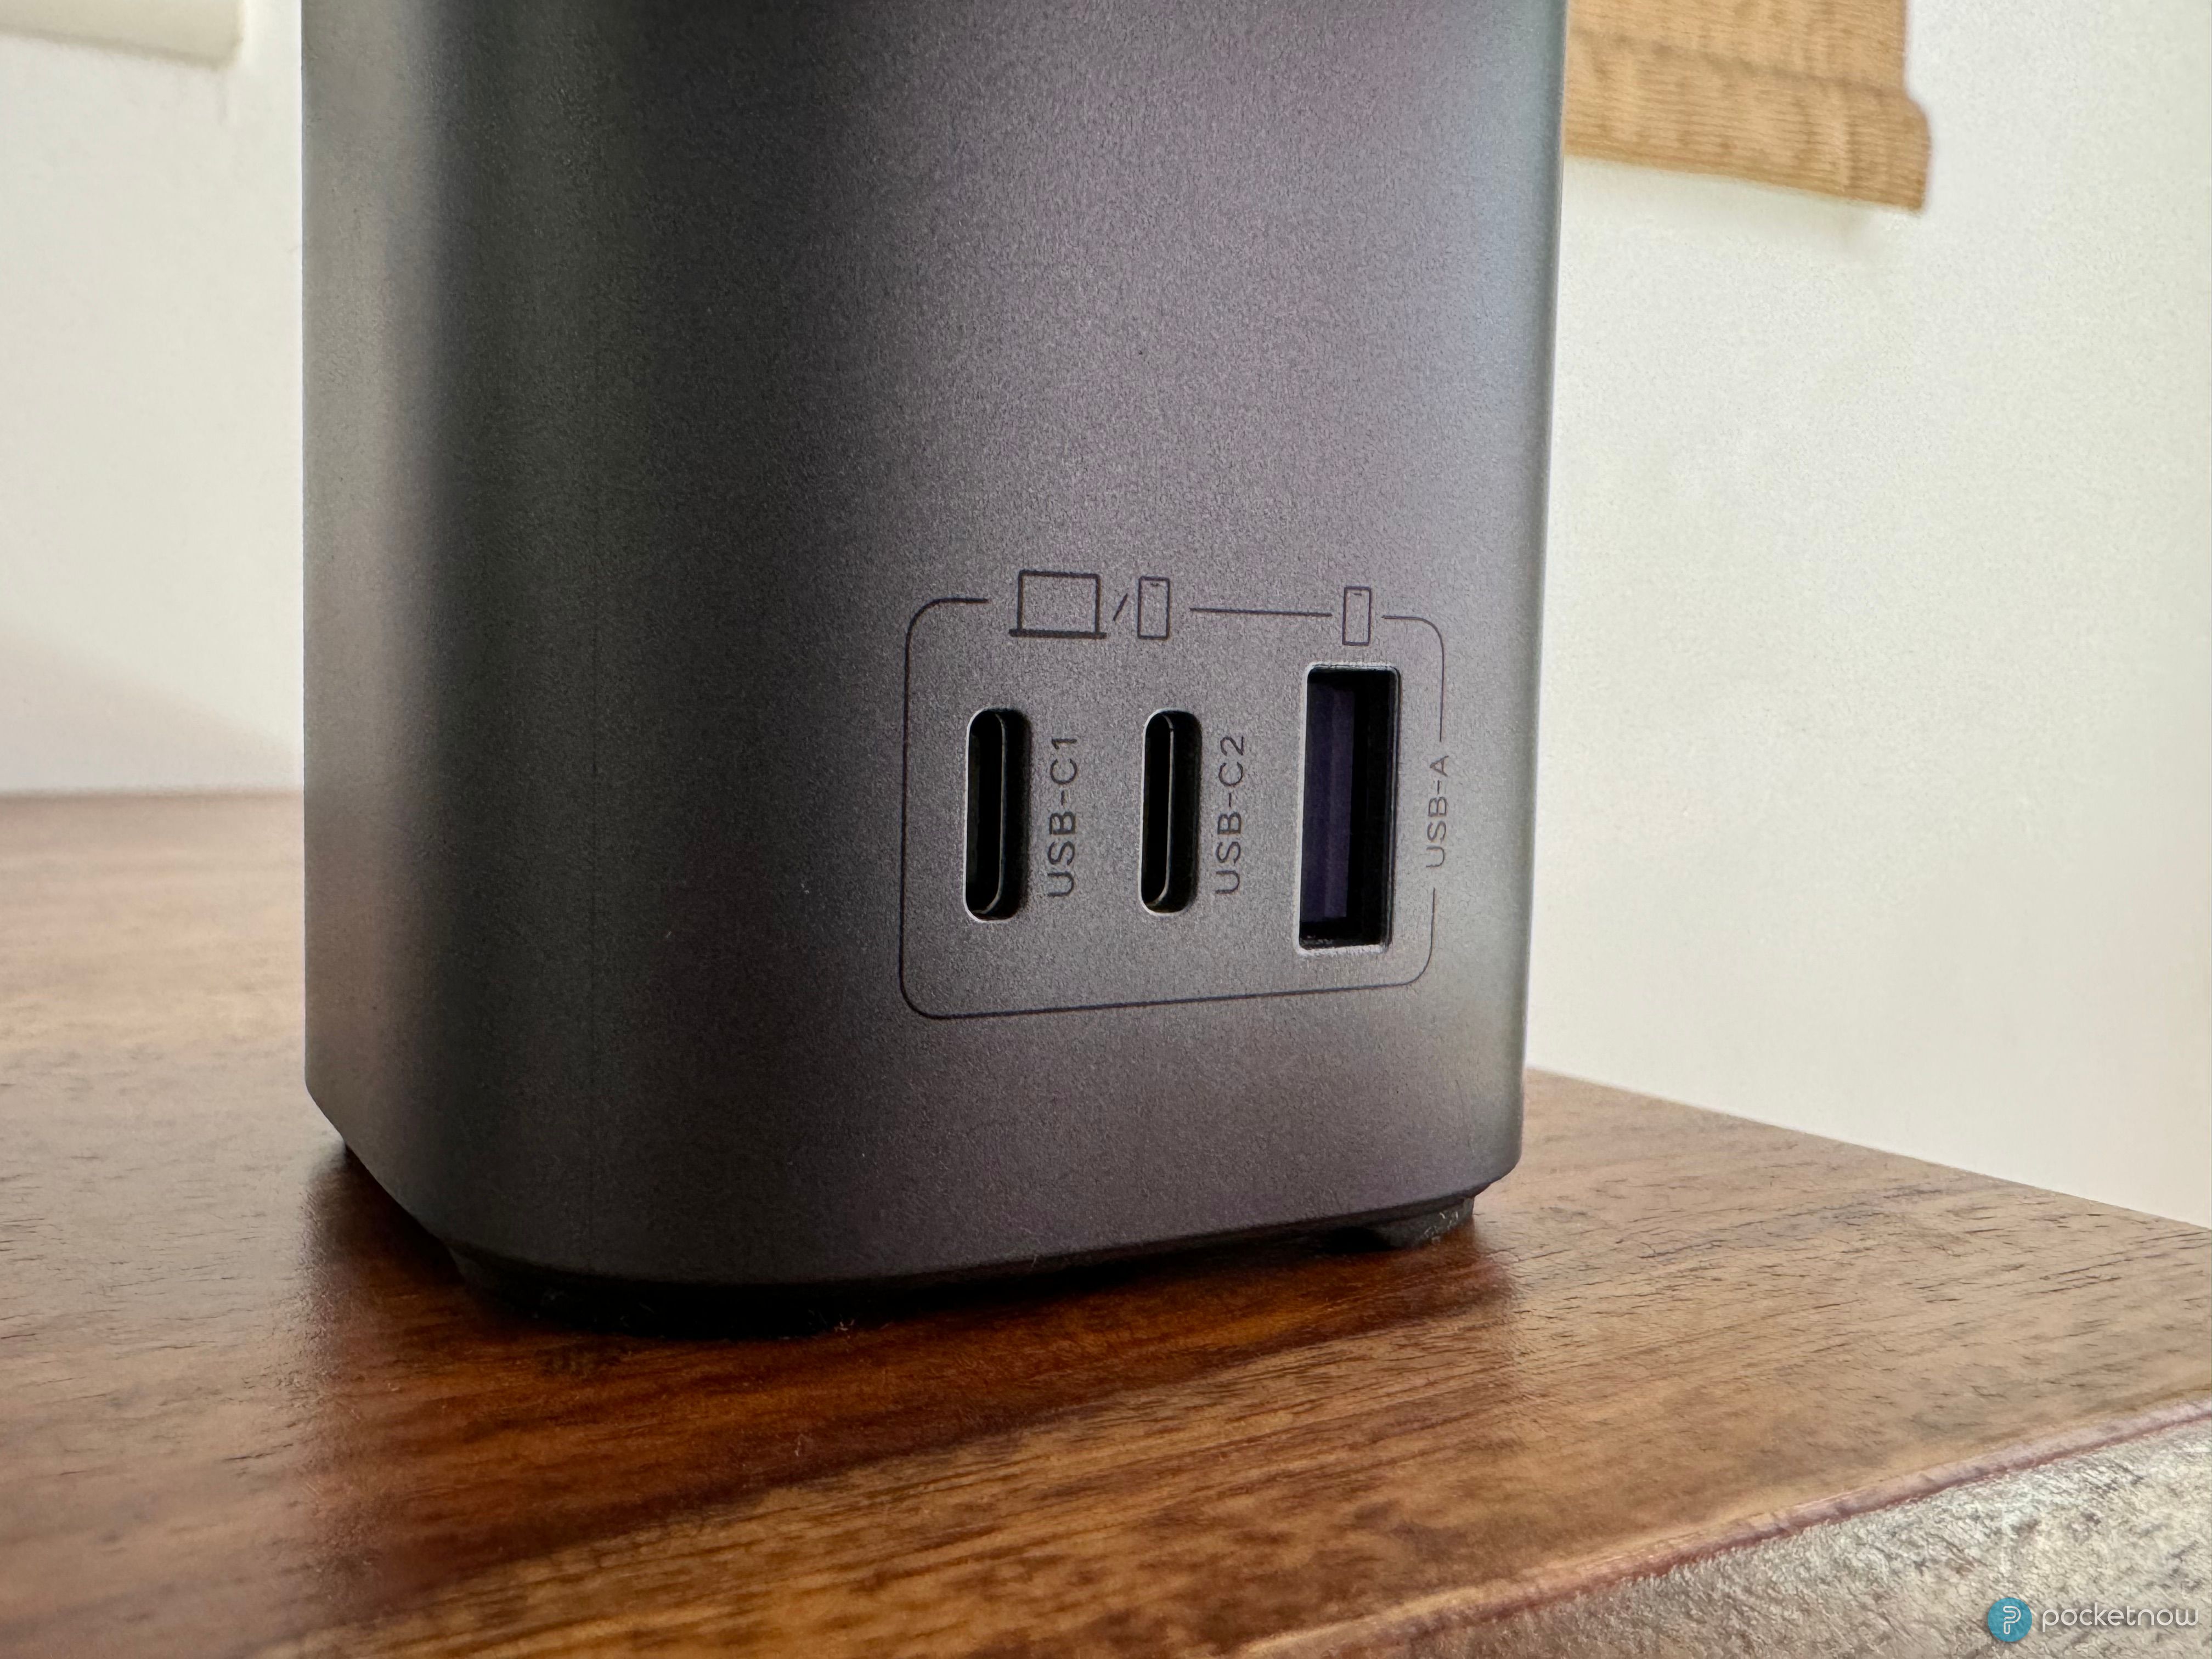 UGreen 100W Mini MagSafe Power Station Review (2 in 1) – MBReviews